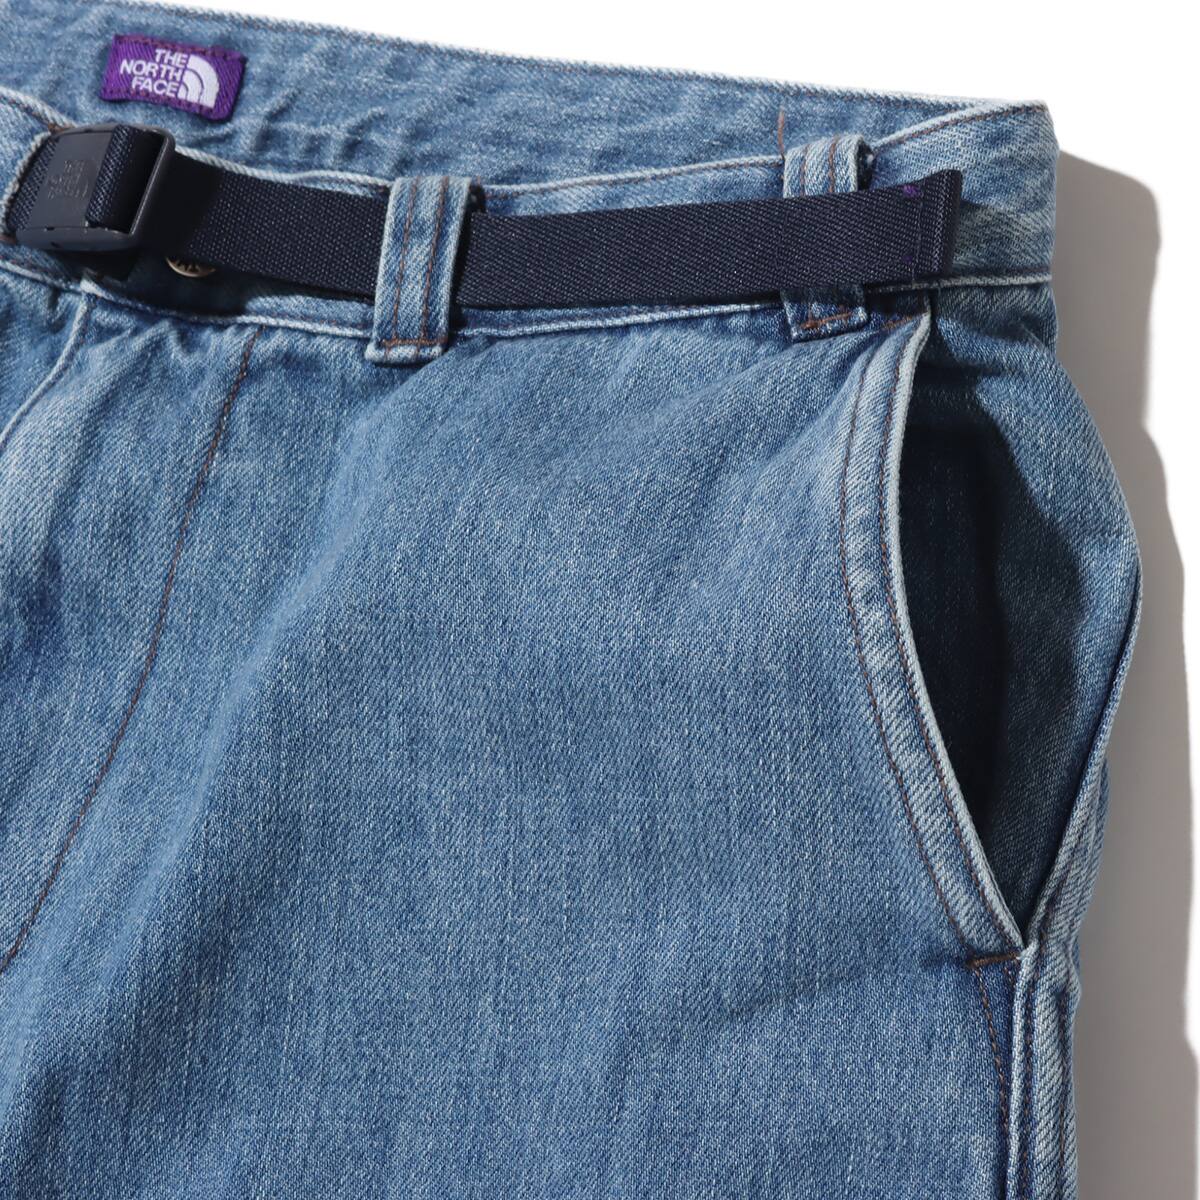 THE NORTH FACE PURPLE LABEL Denim Wide Tapered Field Pants Indigo